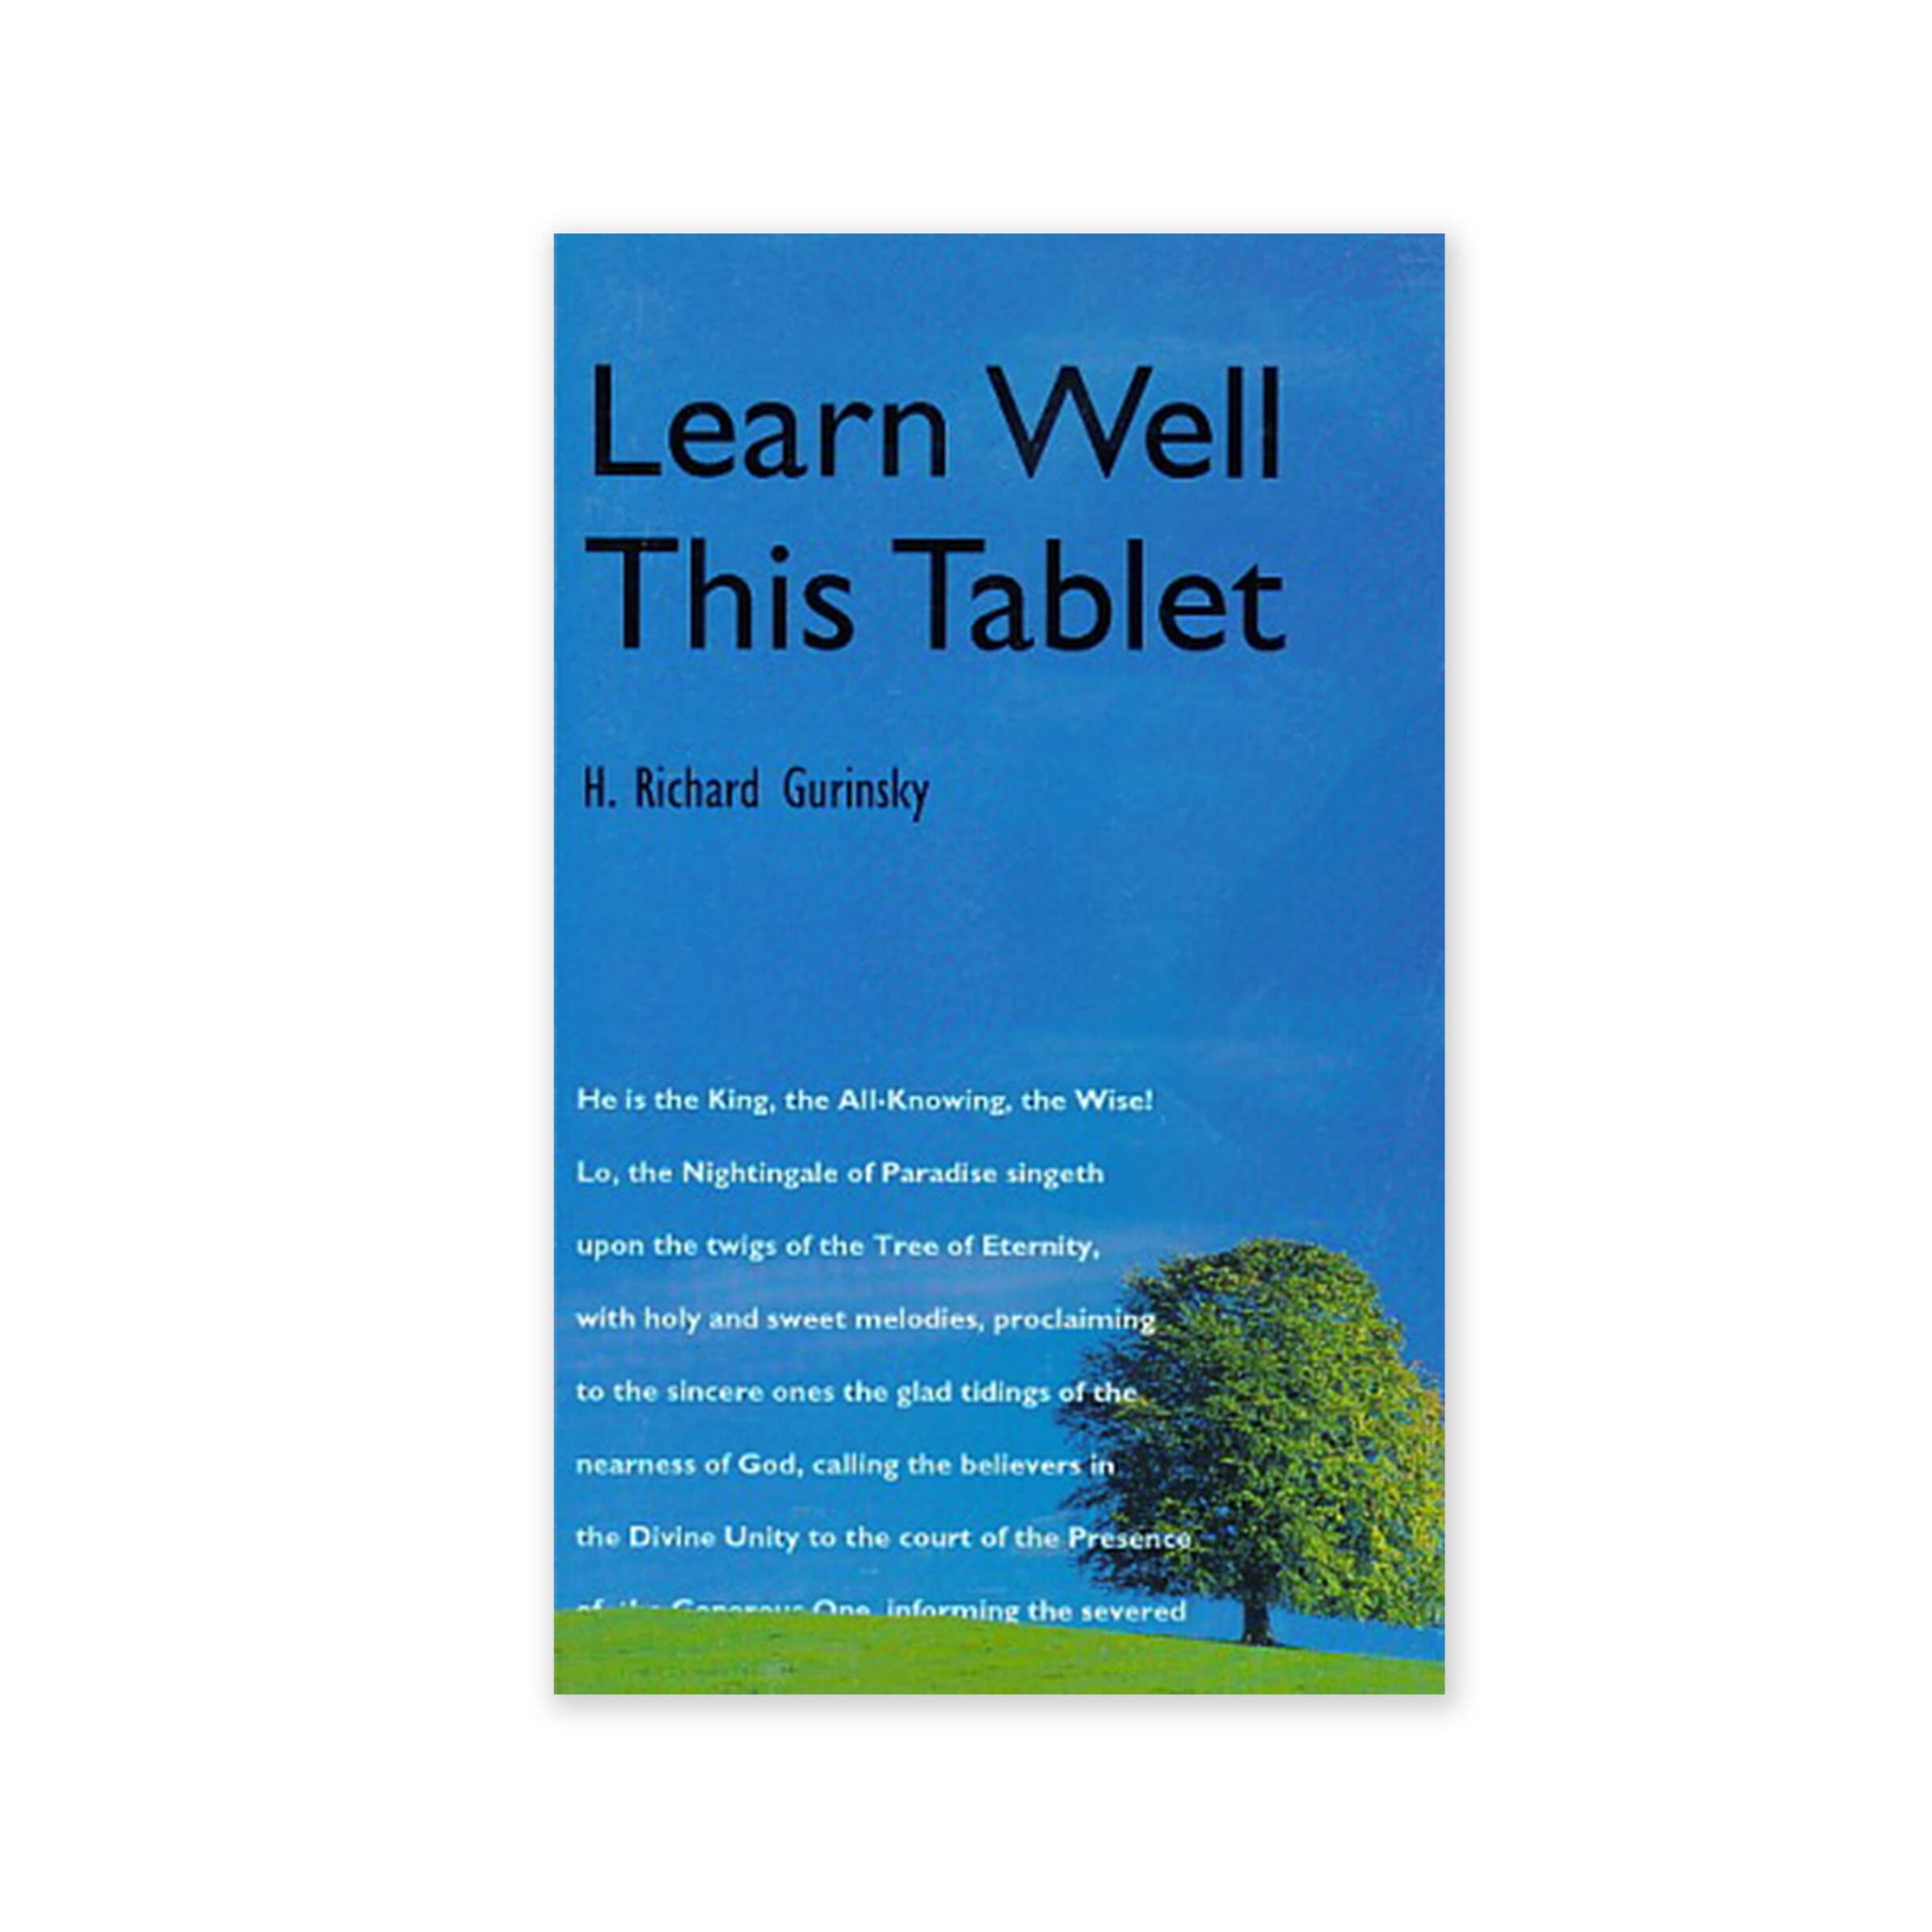 Learn Well This Tablet - An Exploration of One of Baha'u'llah's Best Known Tablets